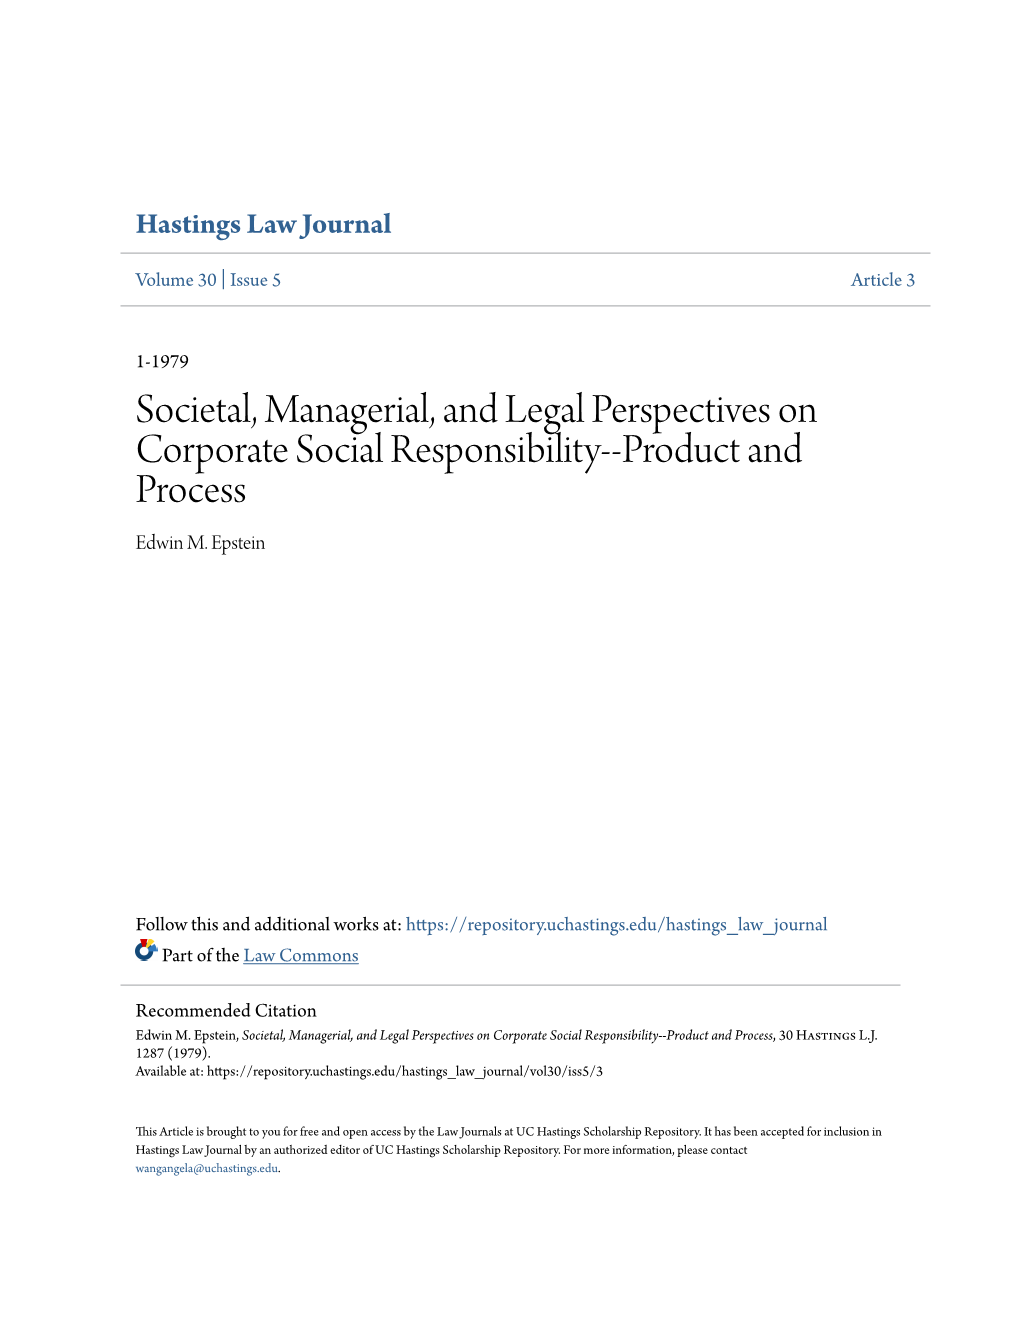 Societal, Managerial, and Legal Perspectives on Corporate Social Responsibility--Product and Process Edwin M